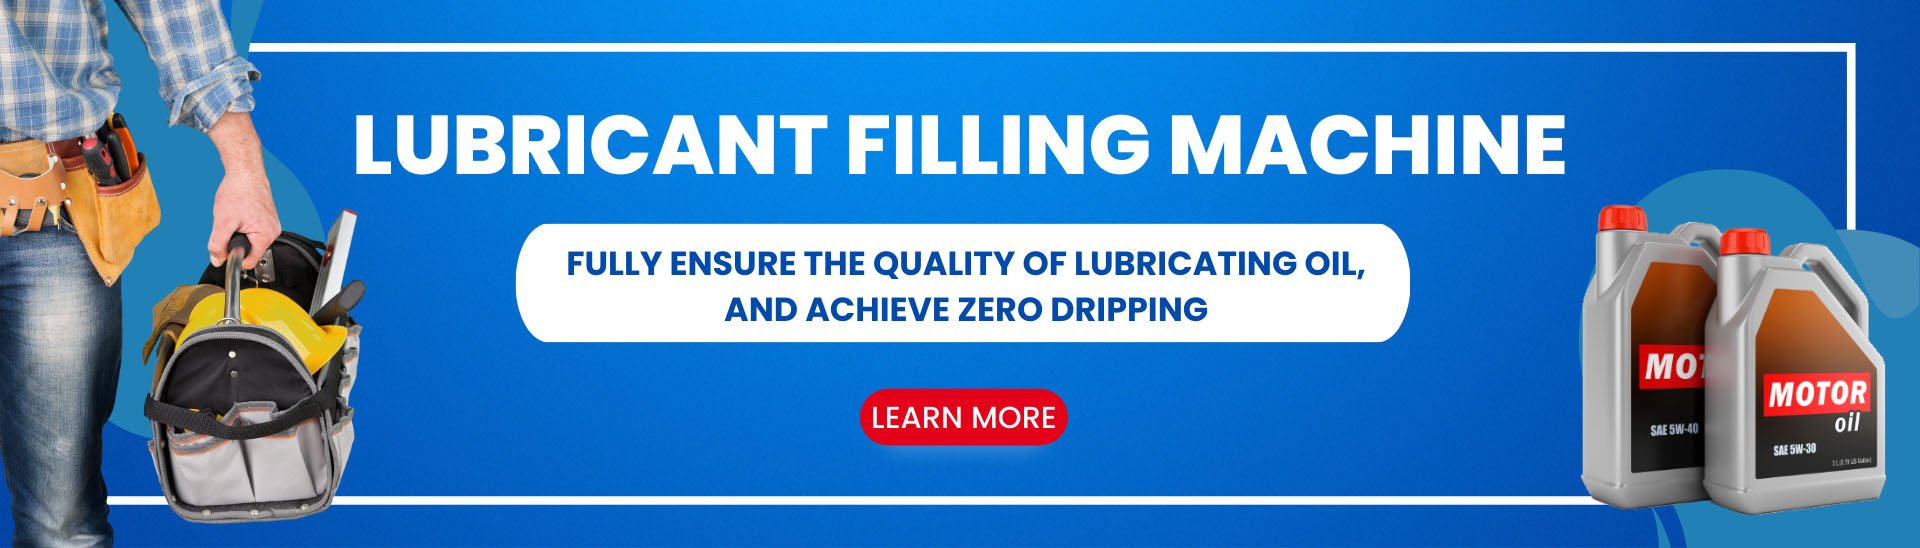 Lubricant Filling Machine Banner